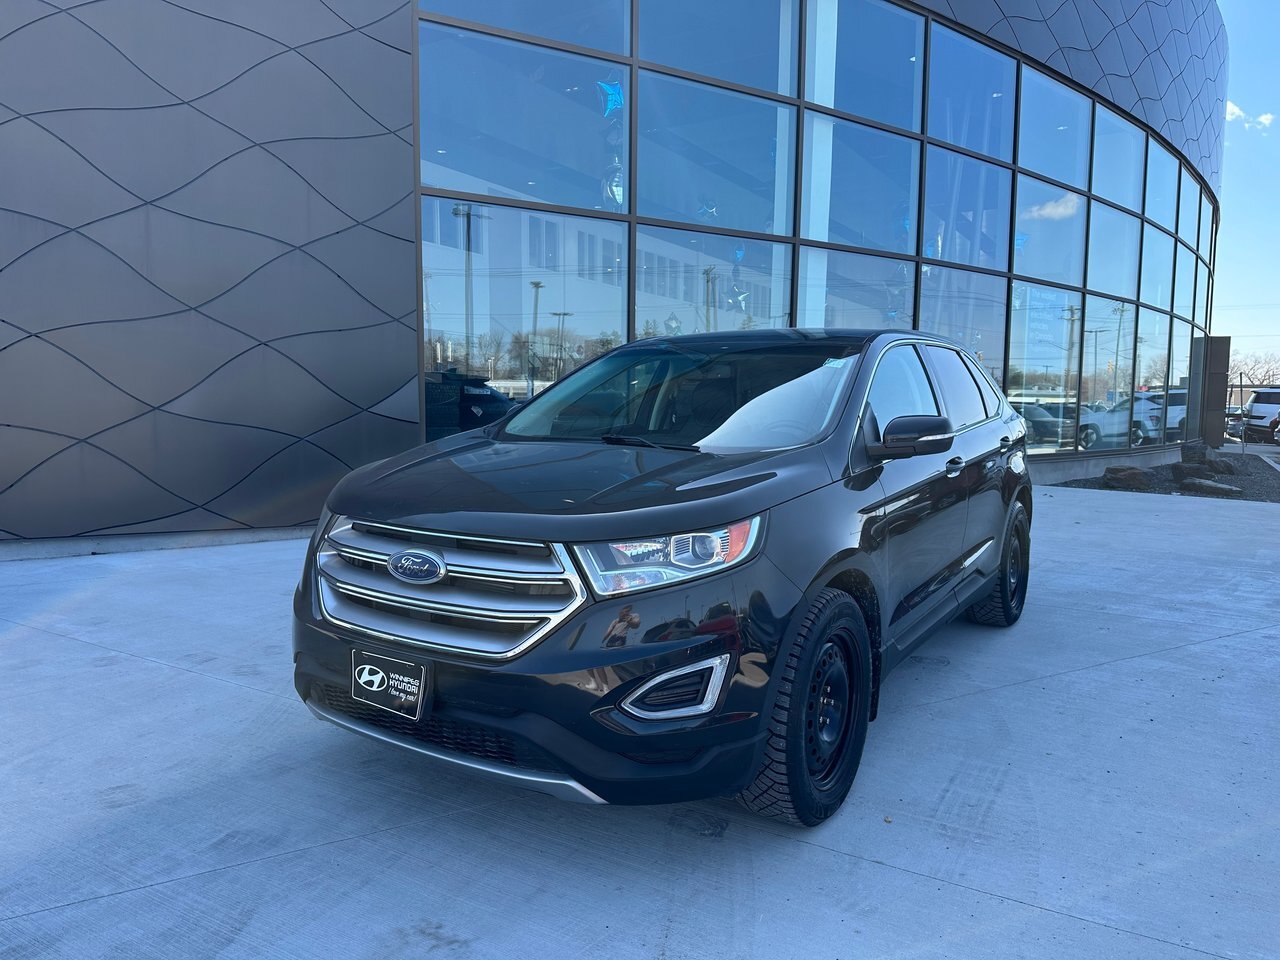 2015 Ford Edge SEL Panoramic sunroof, heated seats, back up camer